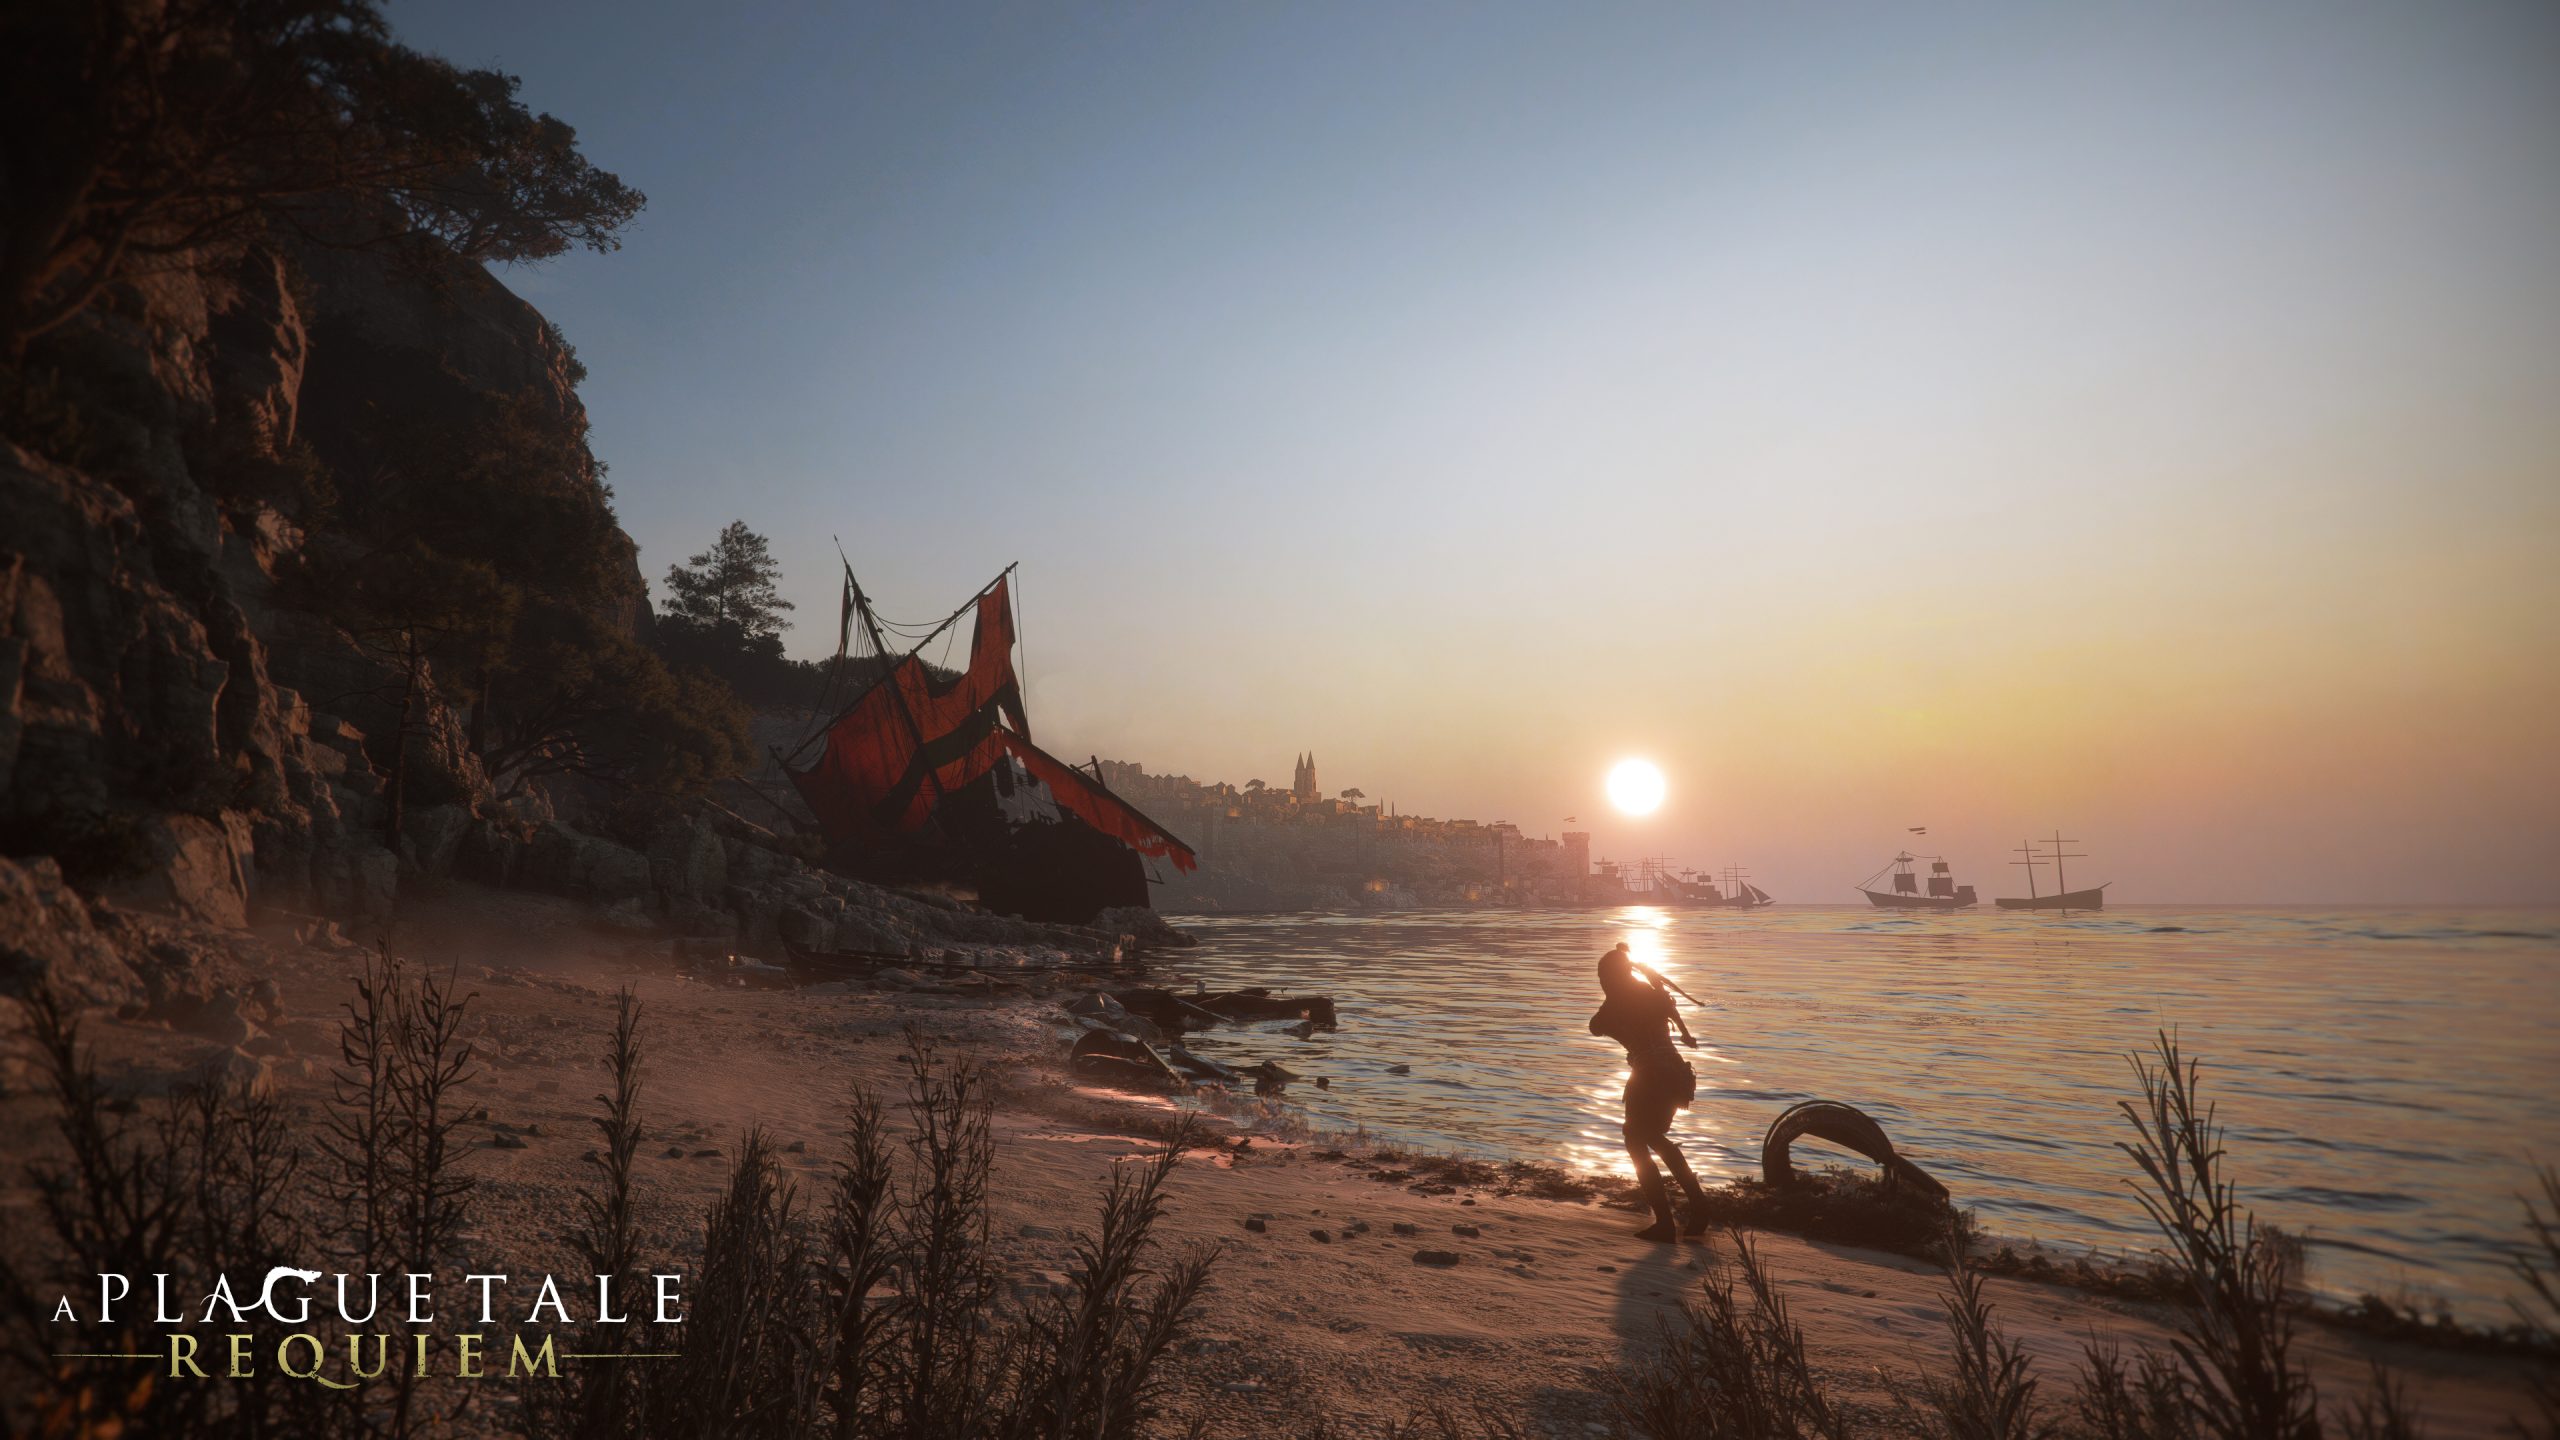 A Plague Tale Requiem' review: Stunning vistas can't overcome slow